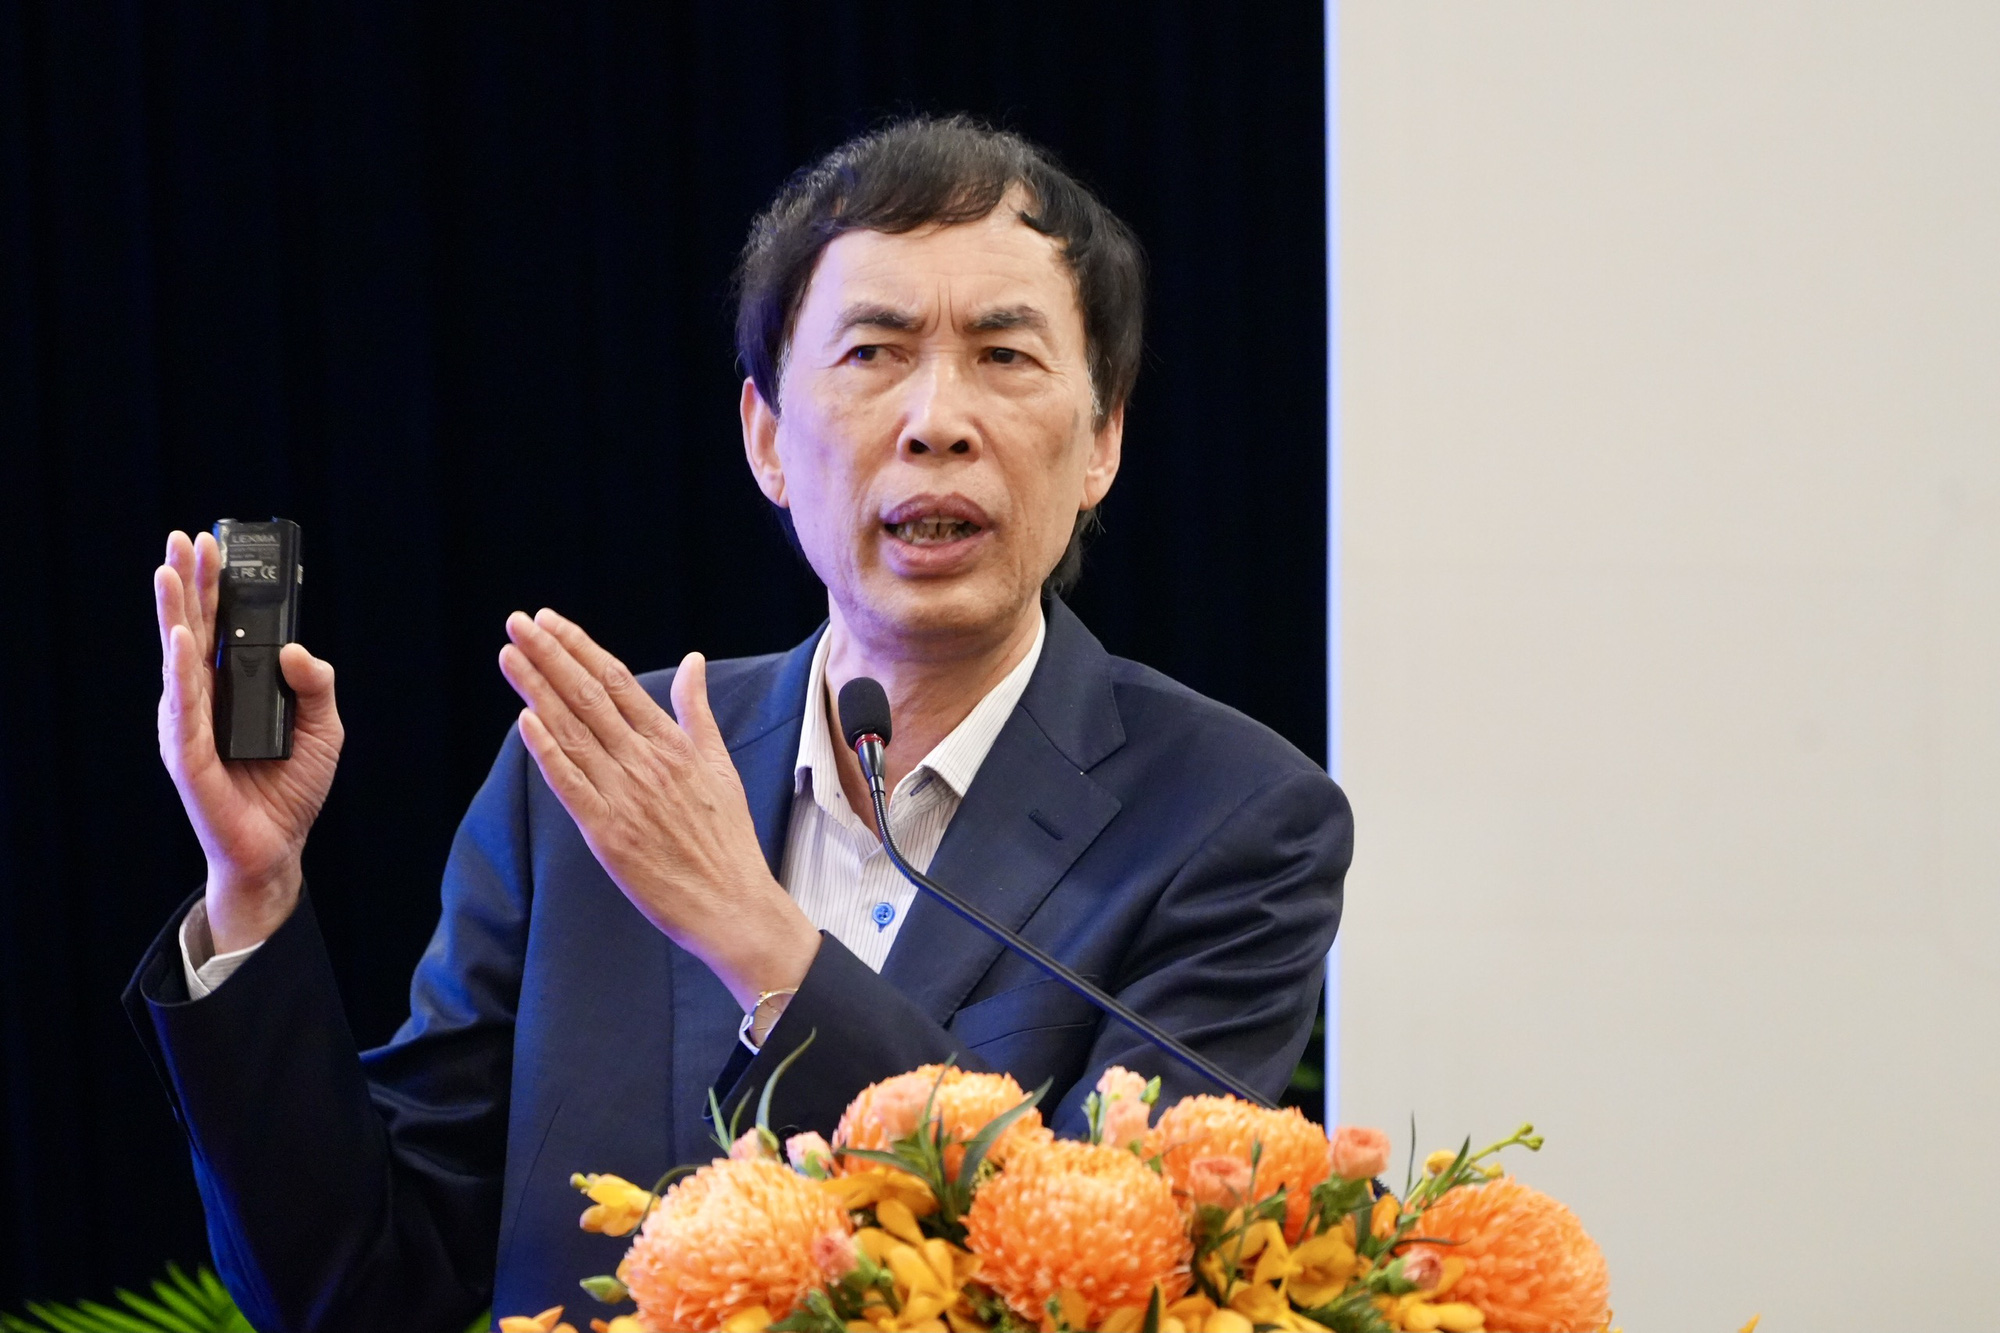 Dr. Vo Tri Thanh, former vice president of the Central Institute for Economic Management, says that appropriate support policies should be worked out for industry. Photo: Huu Hanh / Tuoi Tre